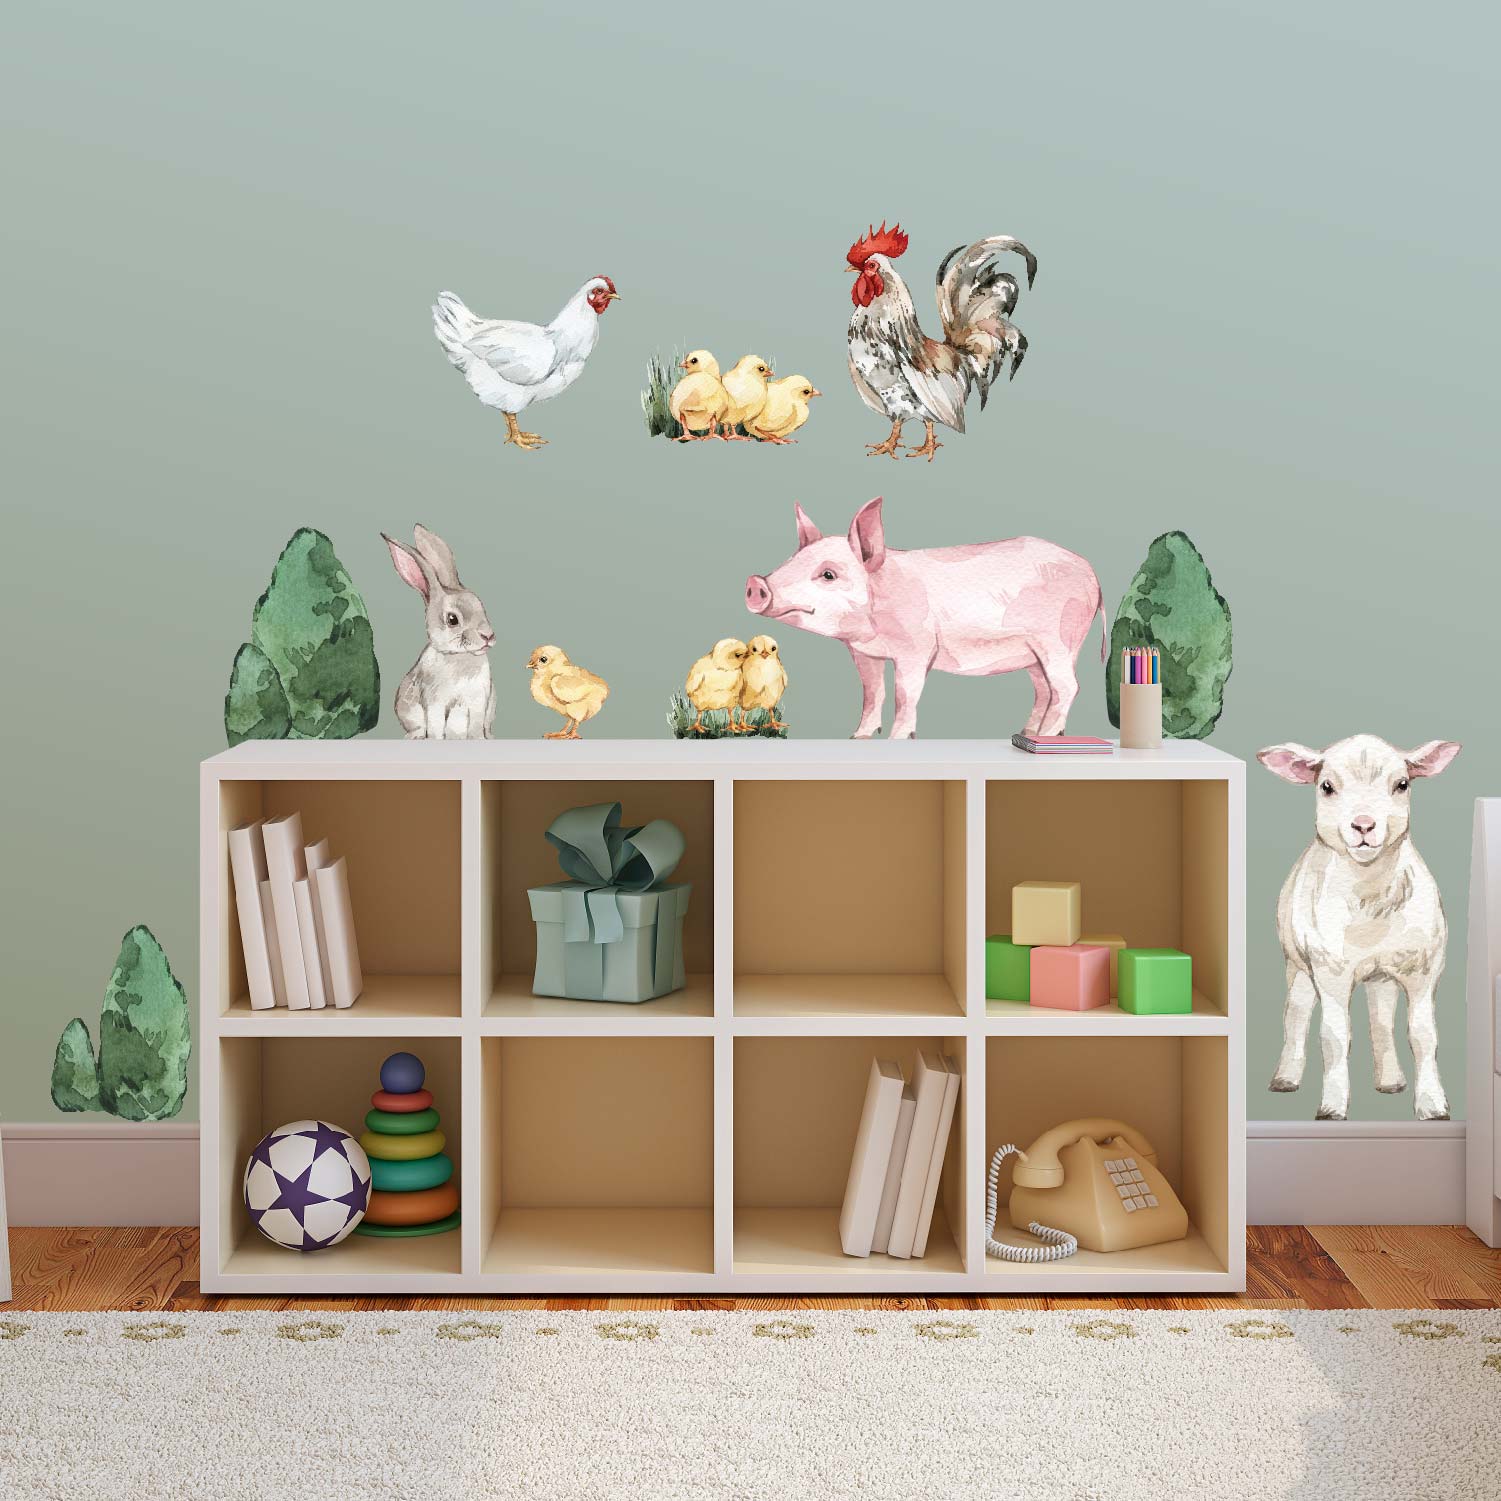 Farm Animal Wall Decals - Picture Perfect Decals